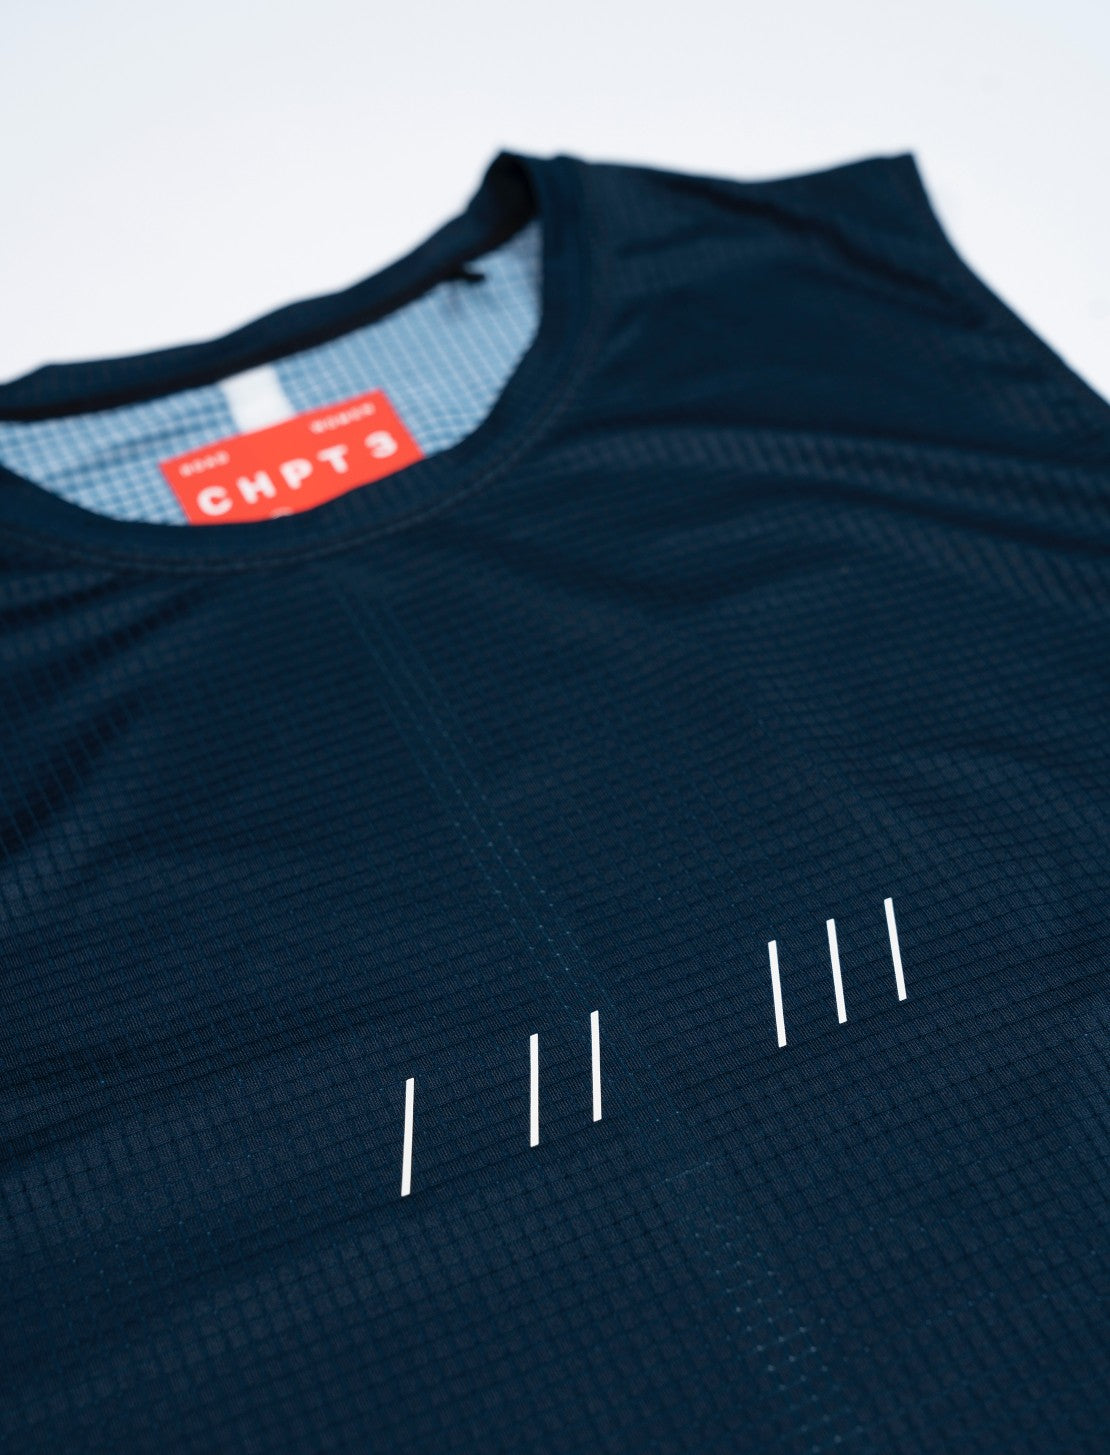 Women's sleeveless training top in Outer Space Blue #color_outer-space-blue